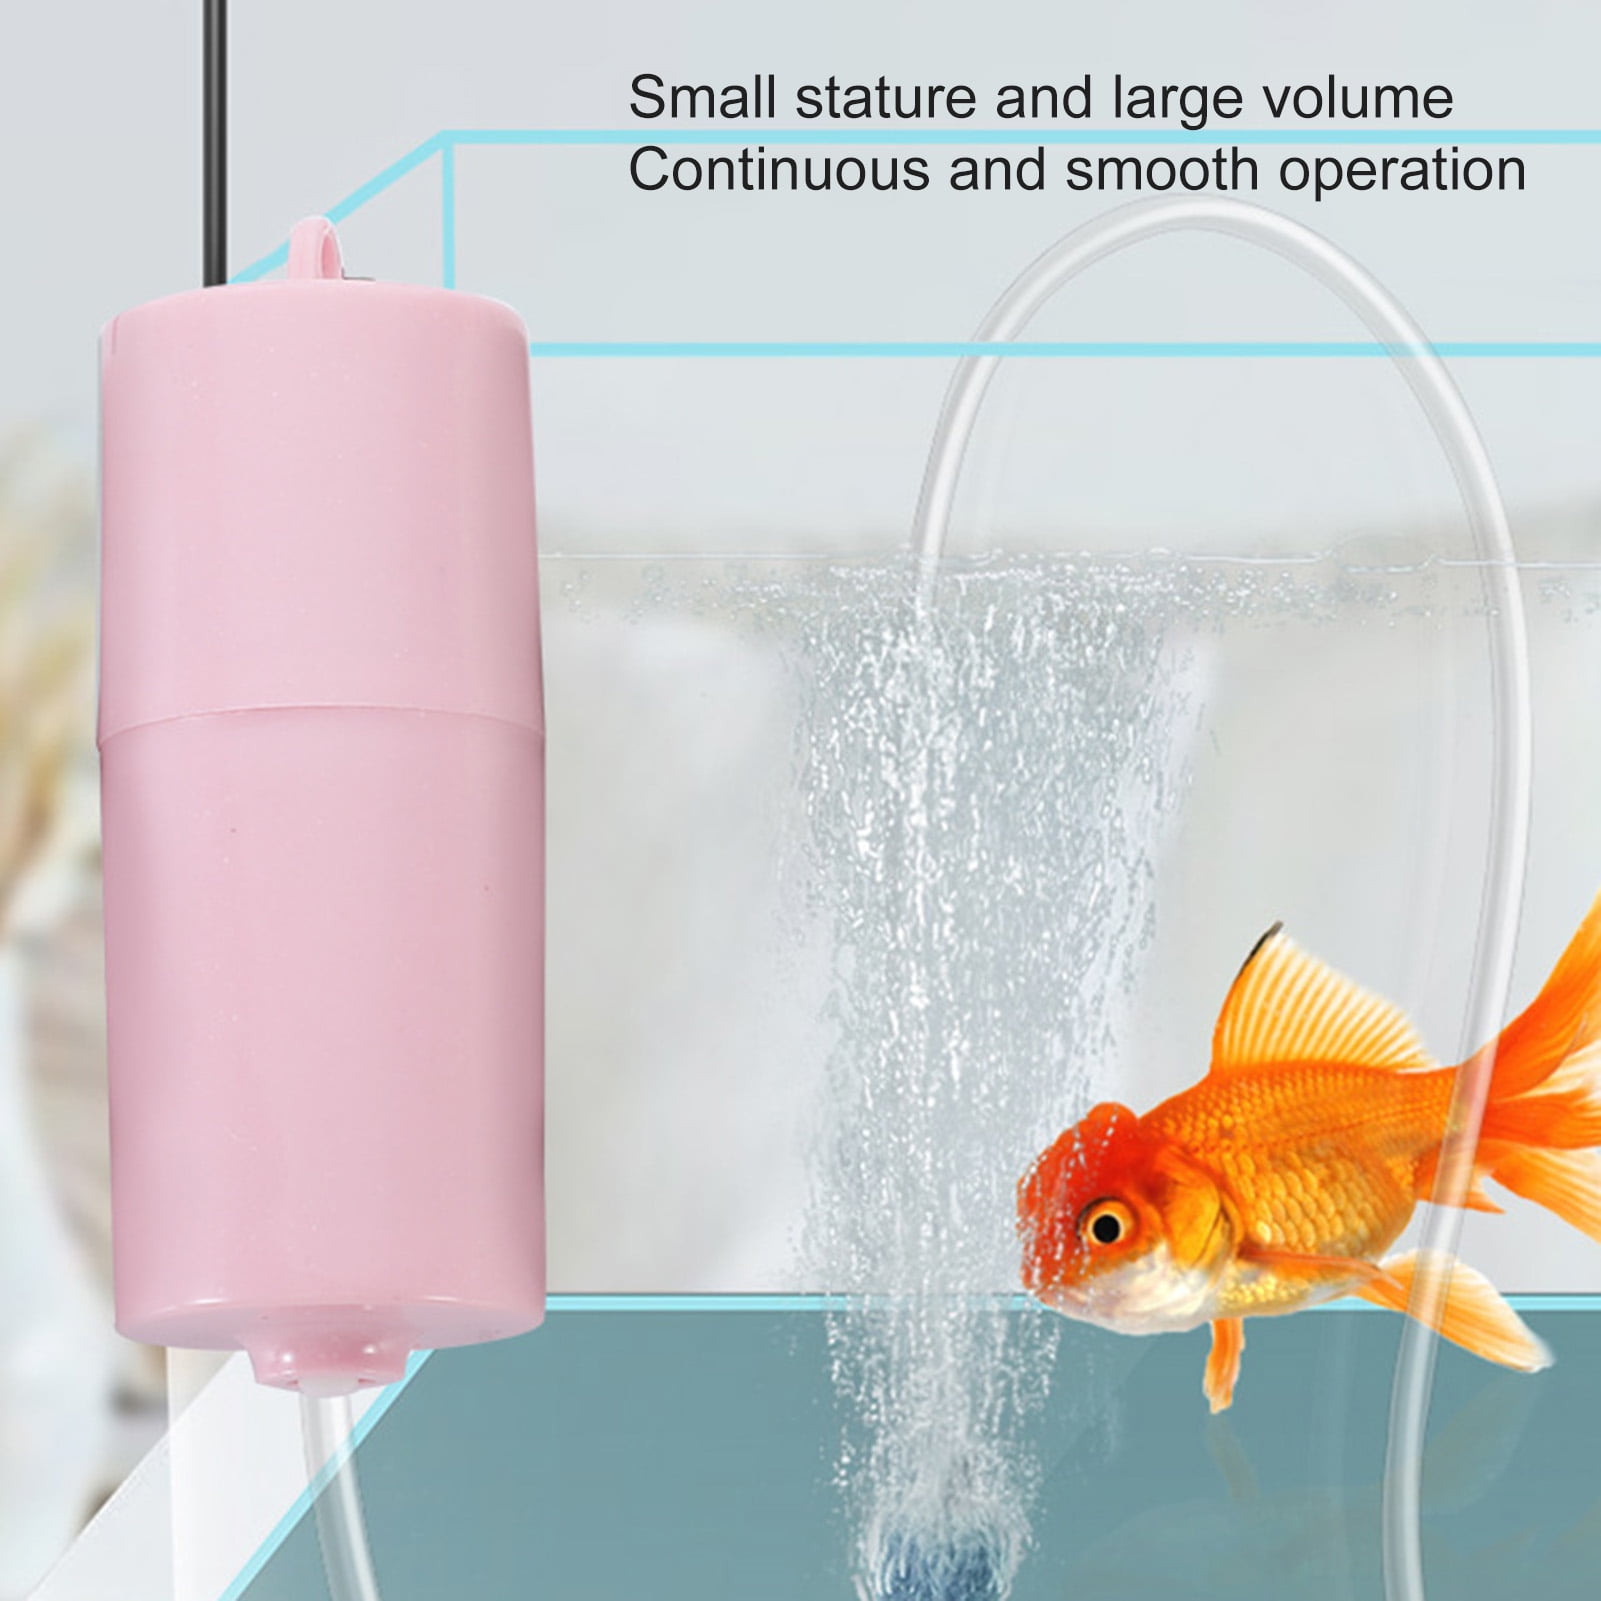 Aquarium Air Pump, USB Rechargeable Lithium Battery Powered Portable Air  Pump for Fish Tanks up to 120 Gallons, AC/DC Dual Mode Oxygen/Aerating Pump